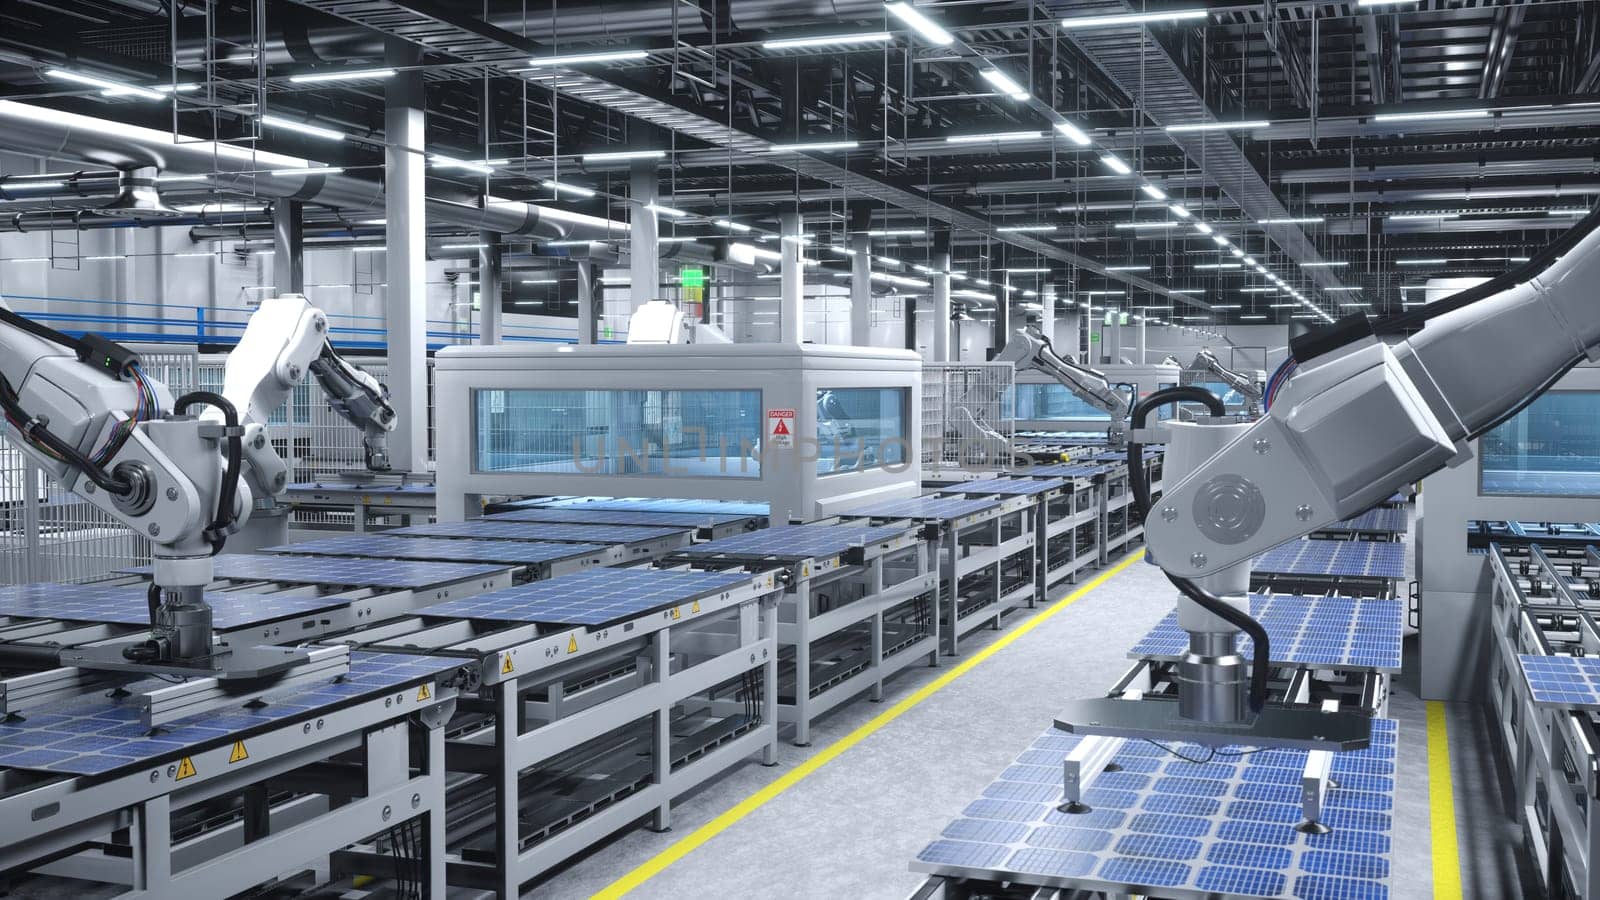 Automatized robotic arms in cutting edge solar panel warehouse handling photovoltaic modules on conveyor belts. Company manufacturing solar cells in green energy facility, 3D illustration